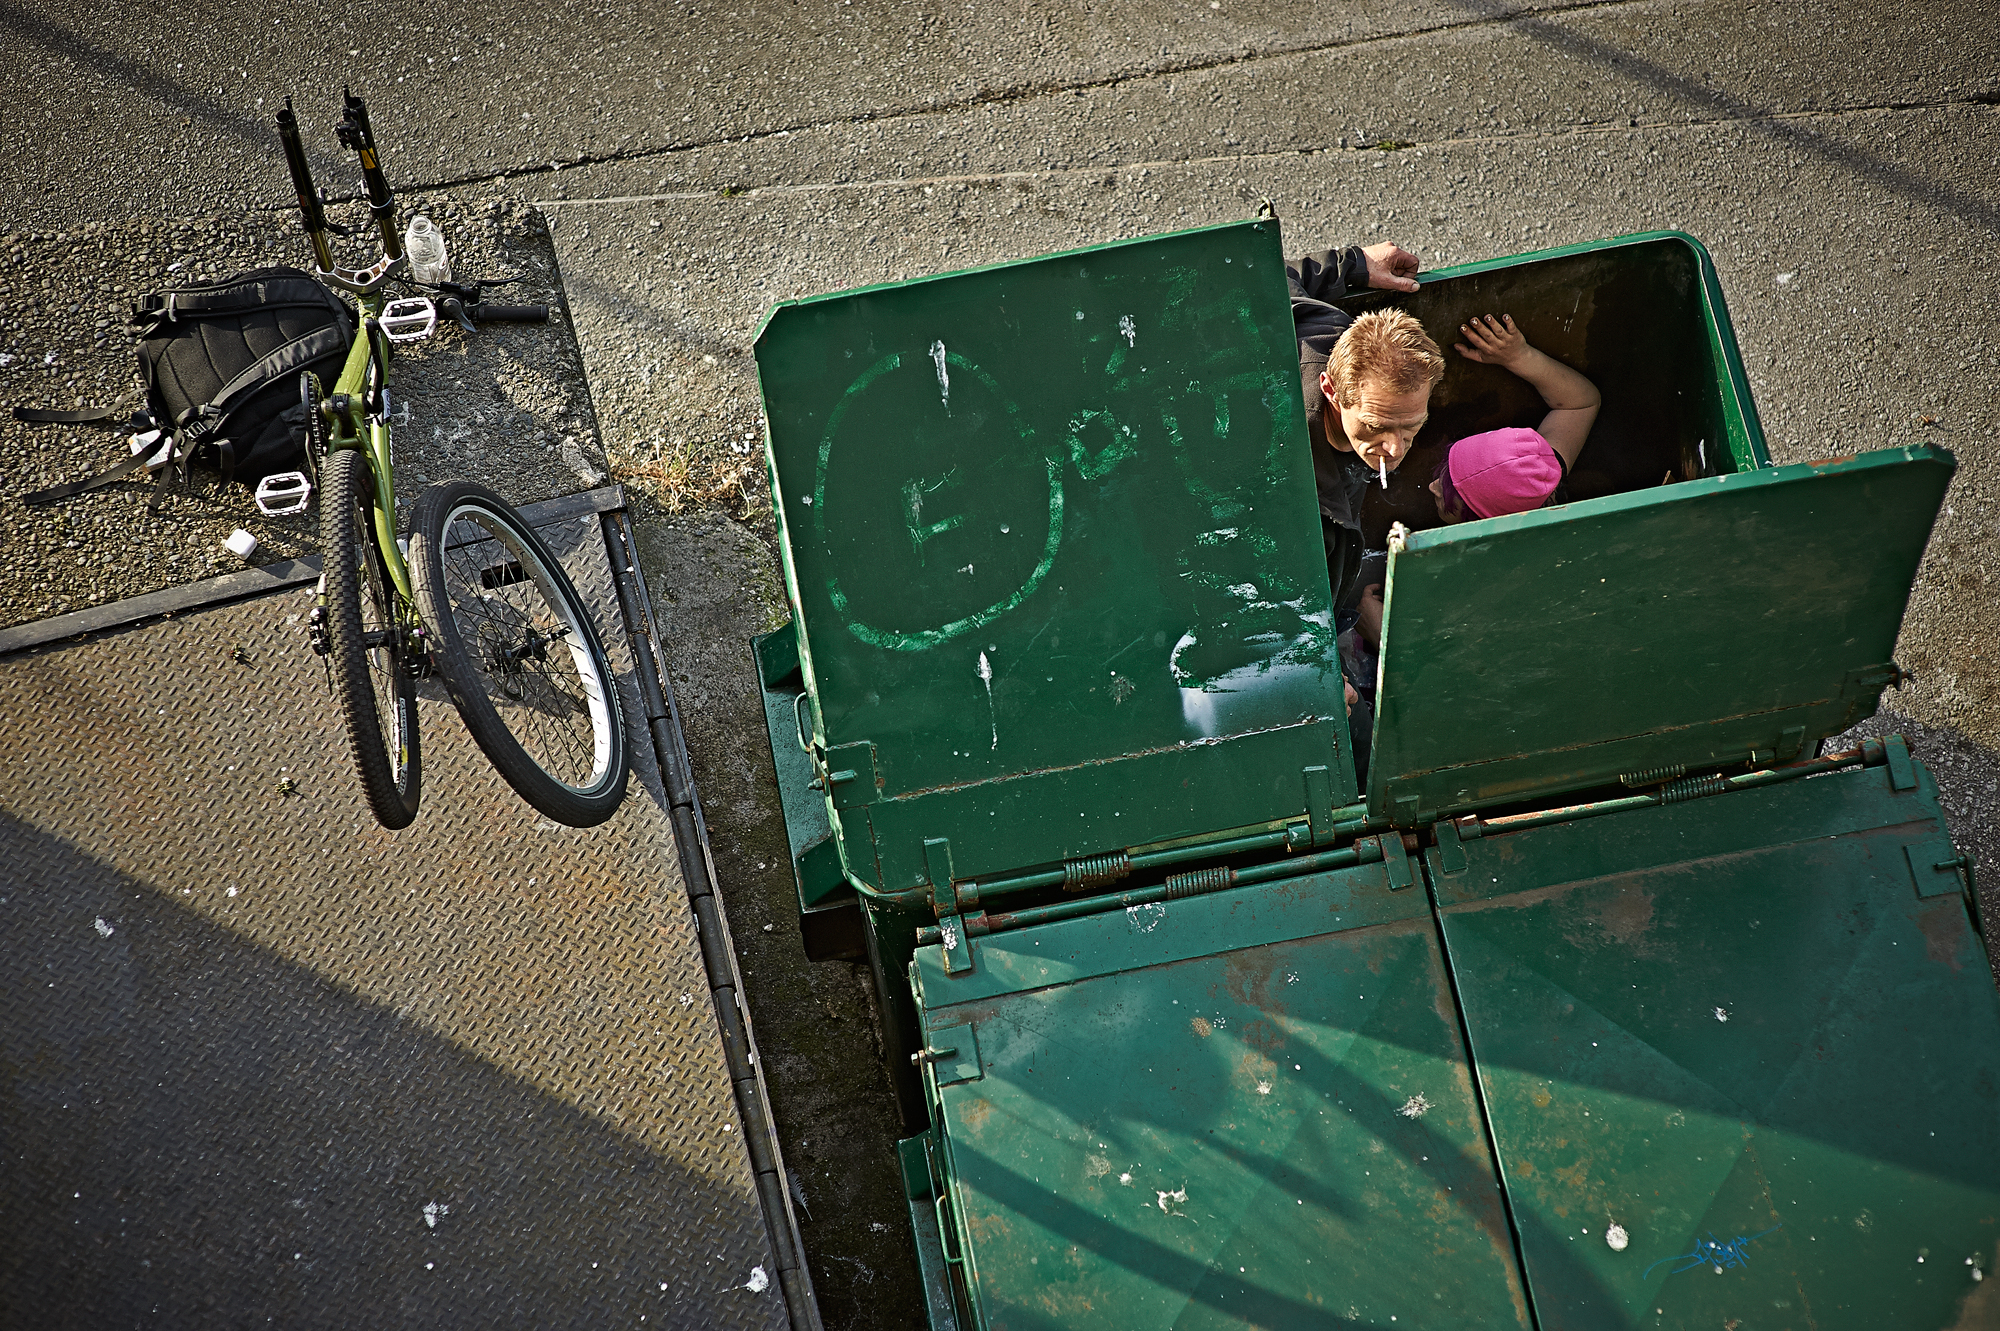 A man looks over his shoulder while being serviced in the dumpster. July, 2014.